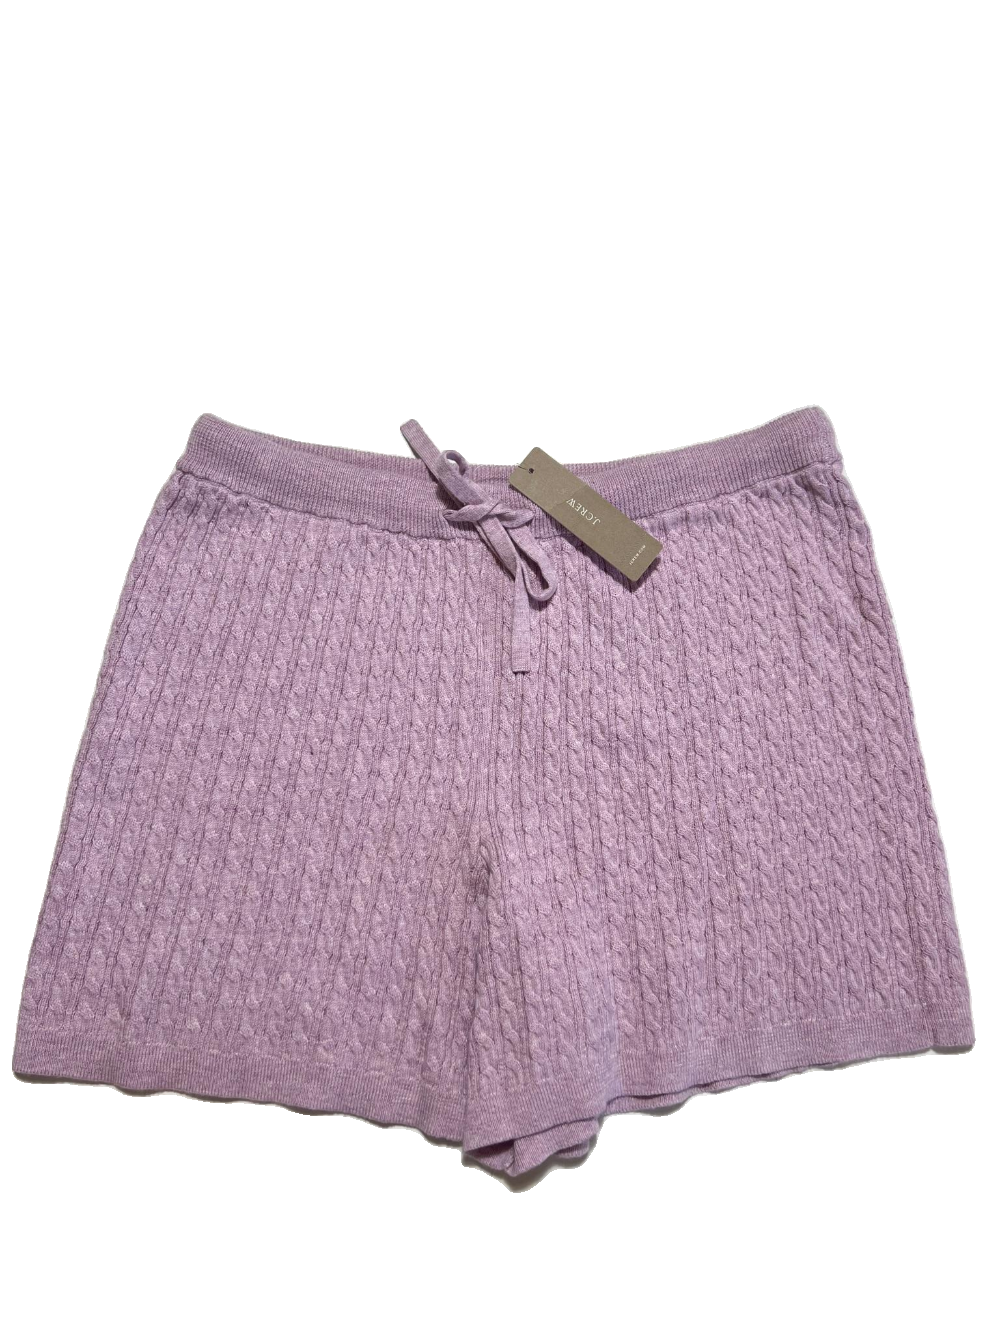 J.crew- Purple Knit Lounge Shorts NEW WITH TAGS